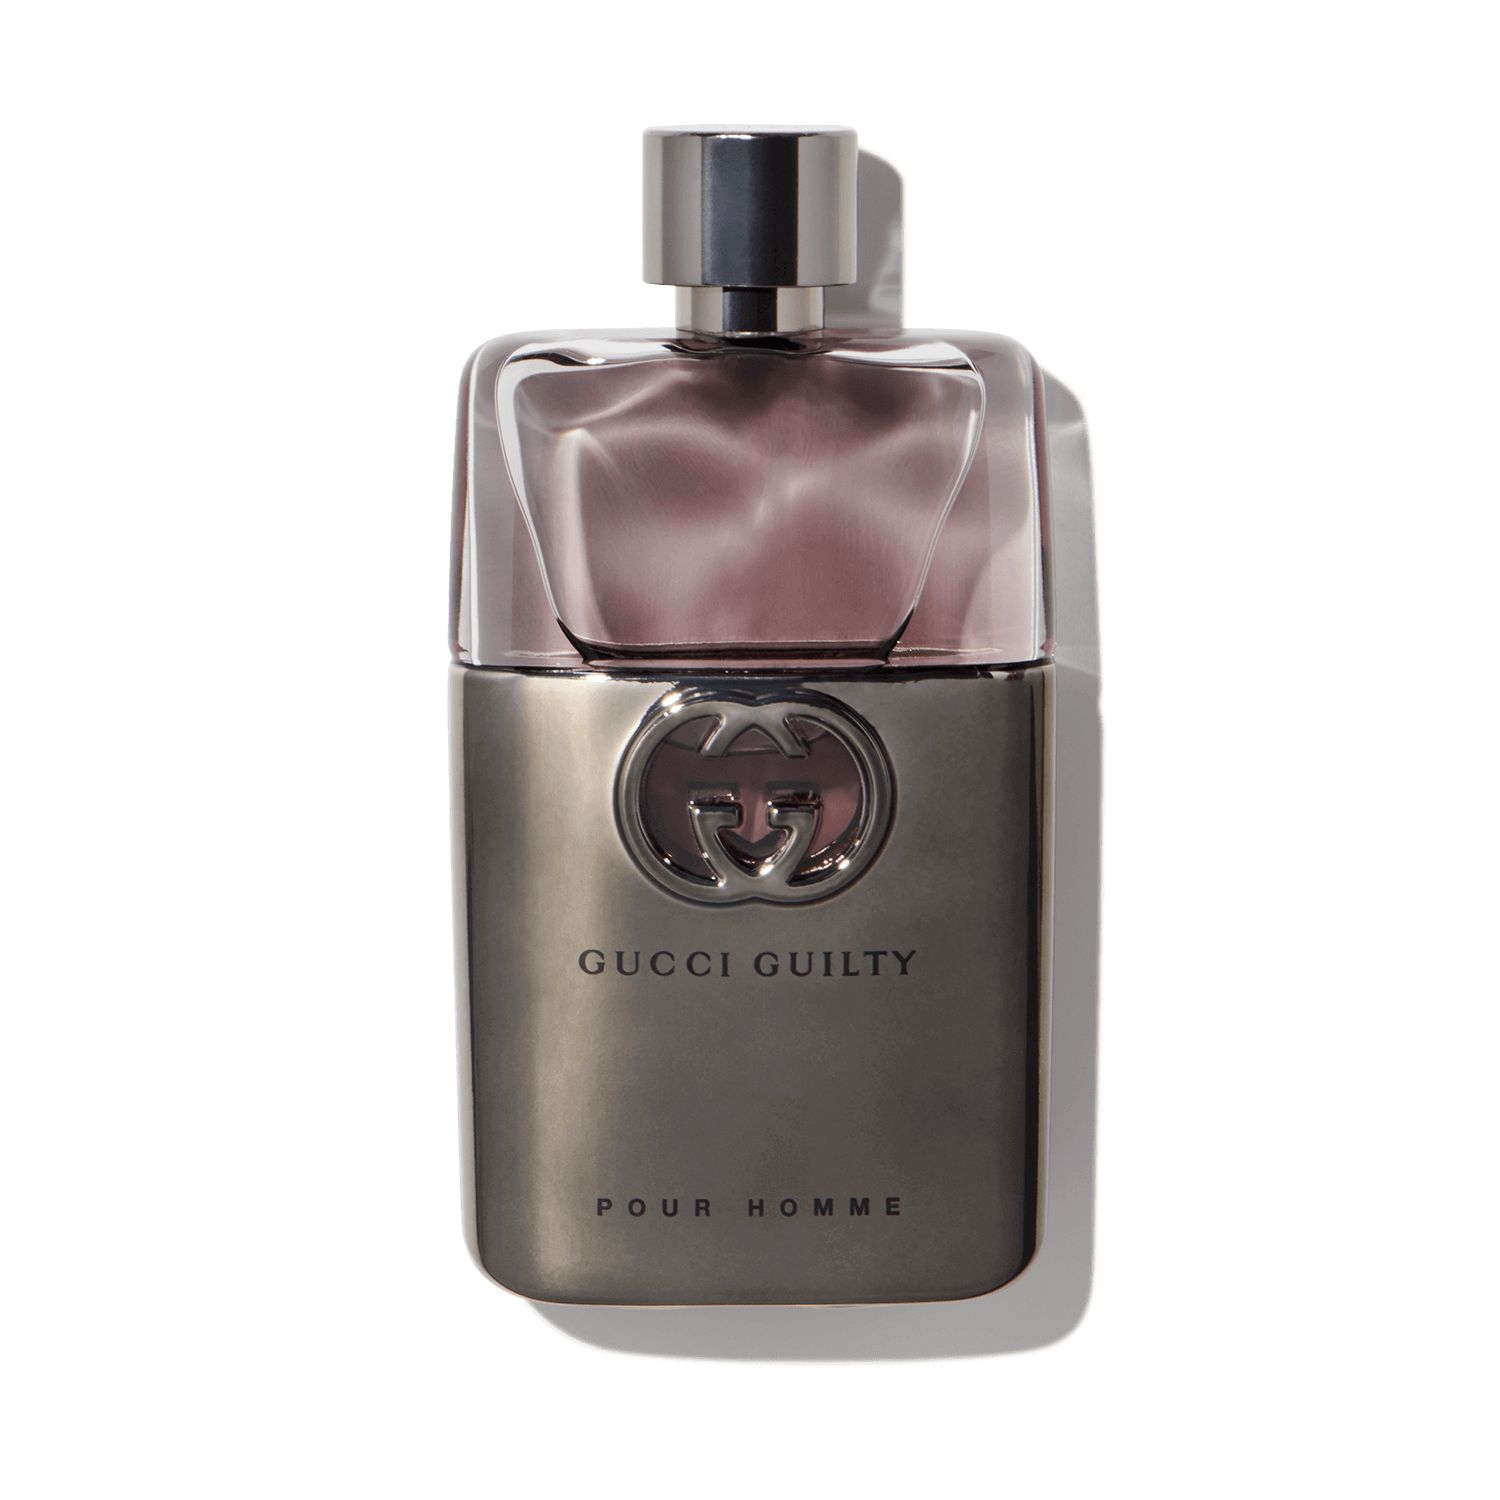 Guilty Pour Homme EDT by Gucci $/month | Scentbird